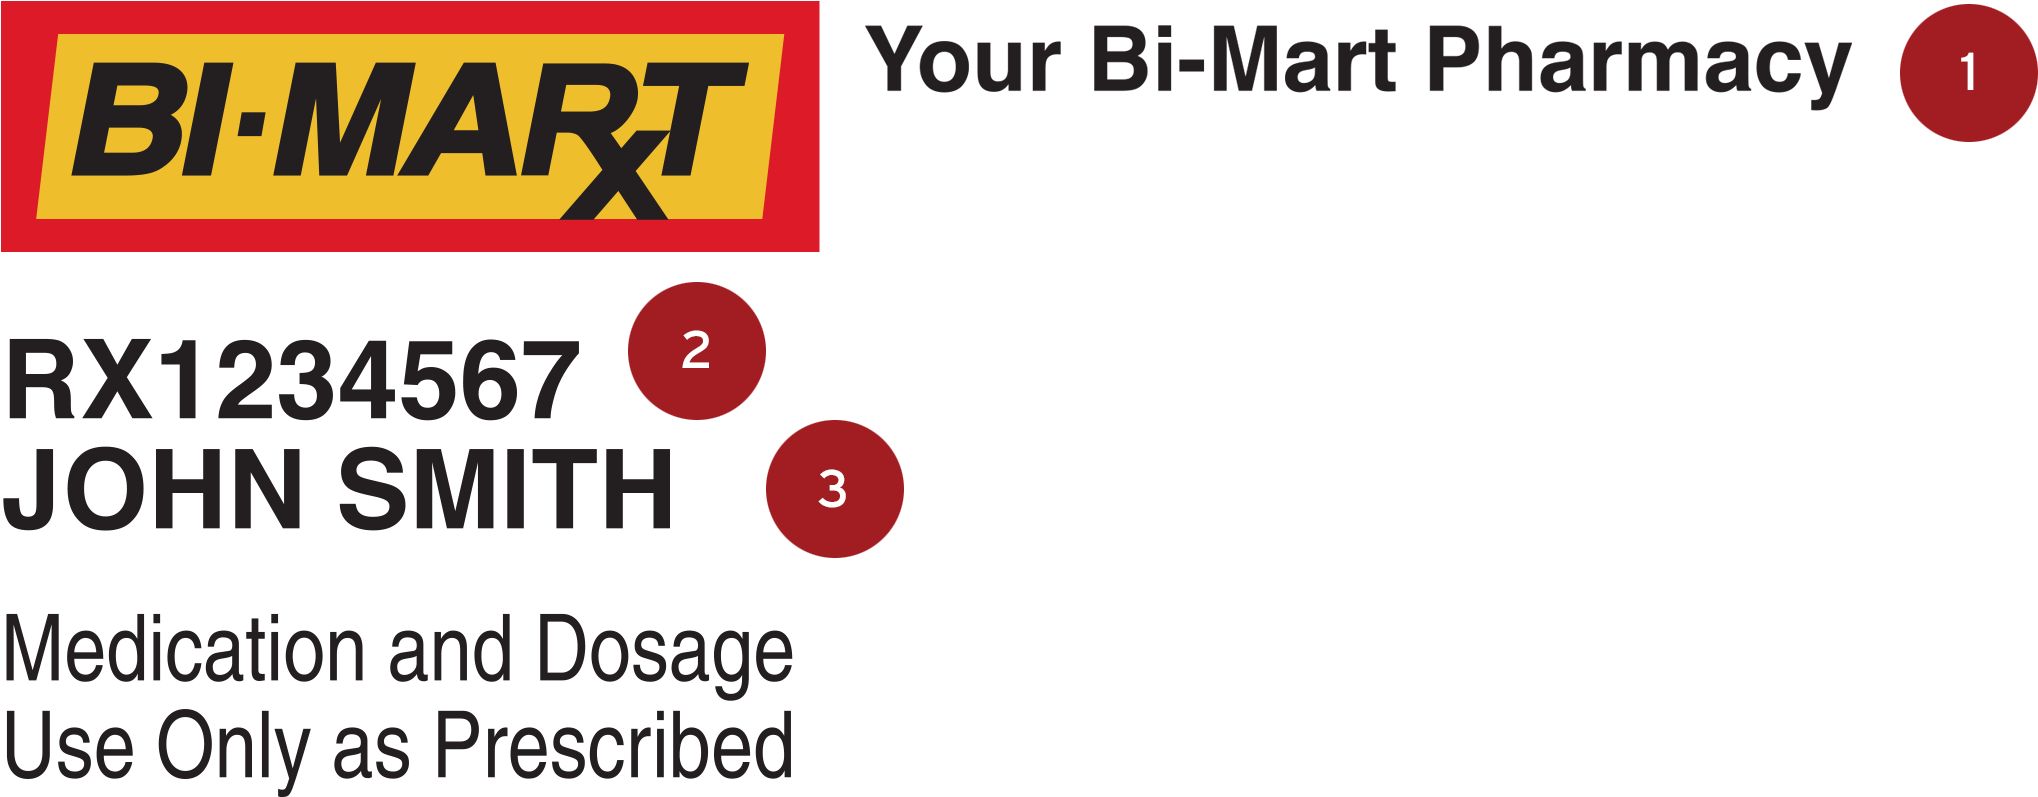 Click Here To View Bi-mart's Pharmacy Privacy Policy - Family Pharmacy (2100x796), Png Download